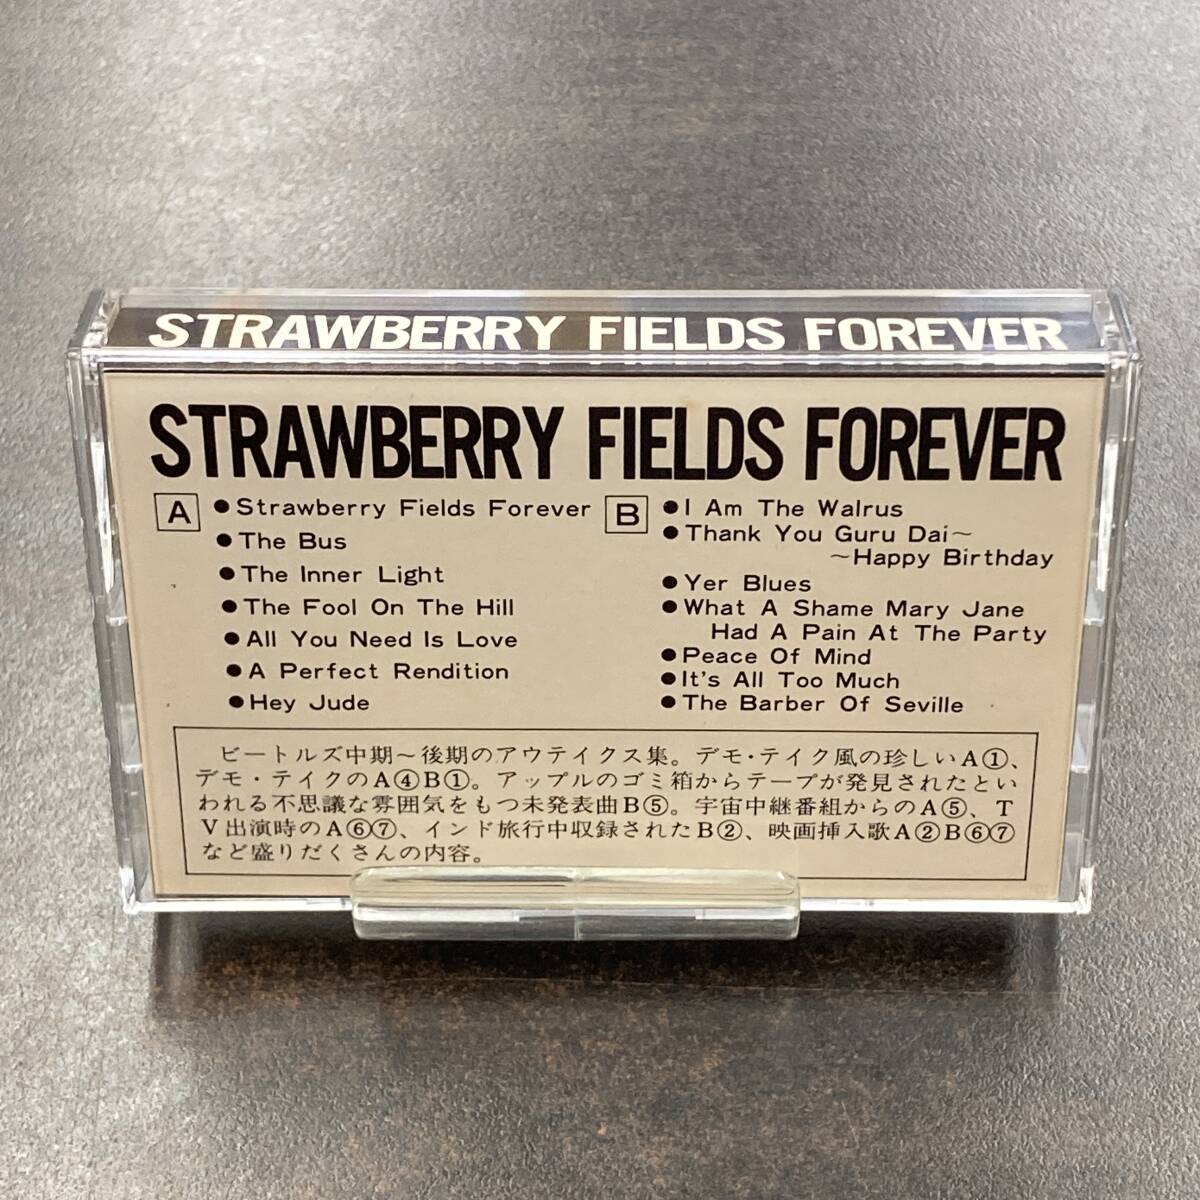 1222M ザ・ビートルズ 研究資料 STRAWBERRY FIELDS FOREVER カセットテープ / THE BEATLES Research materials Cassette Tapeの画像6